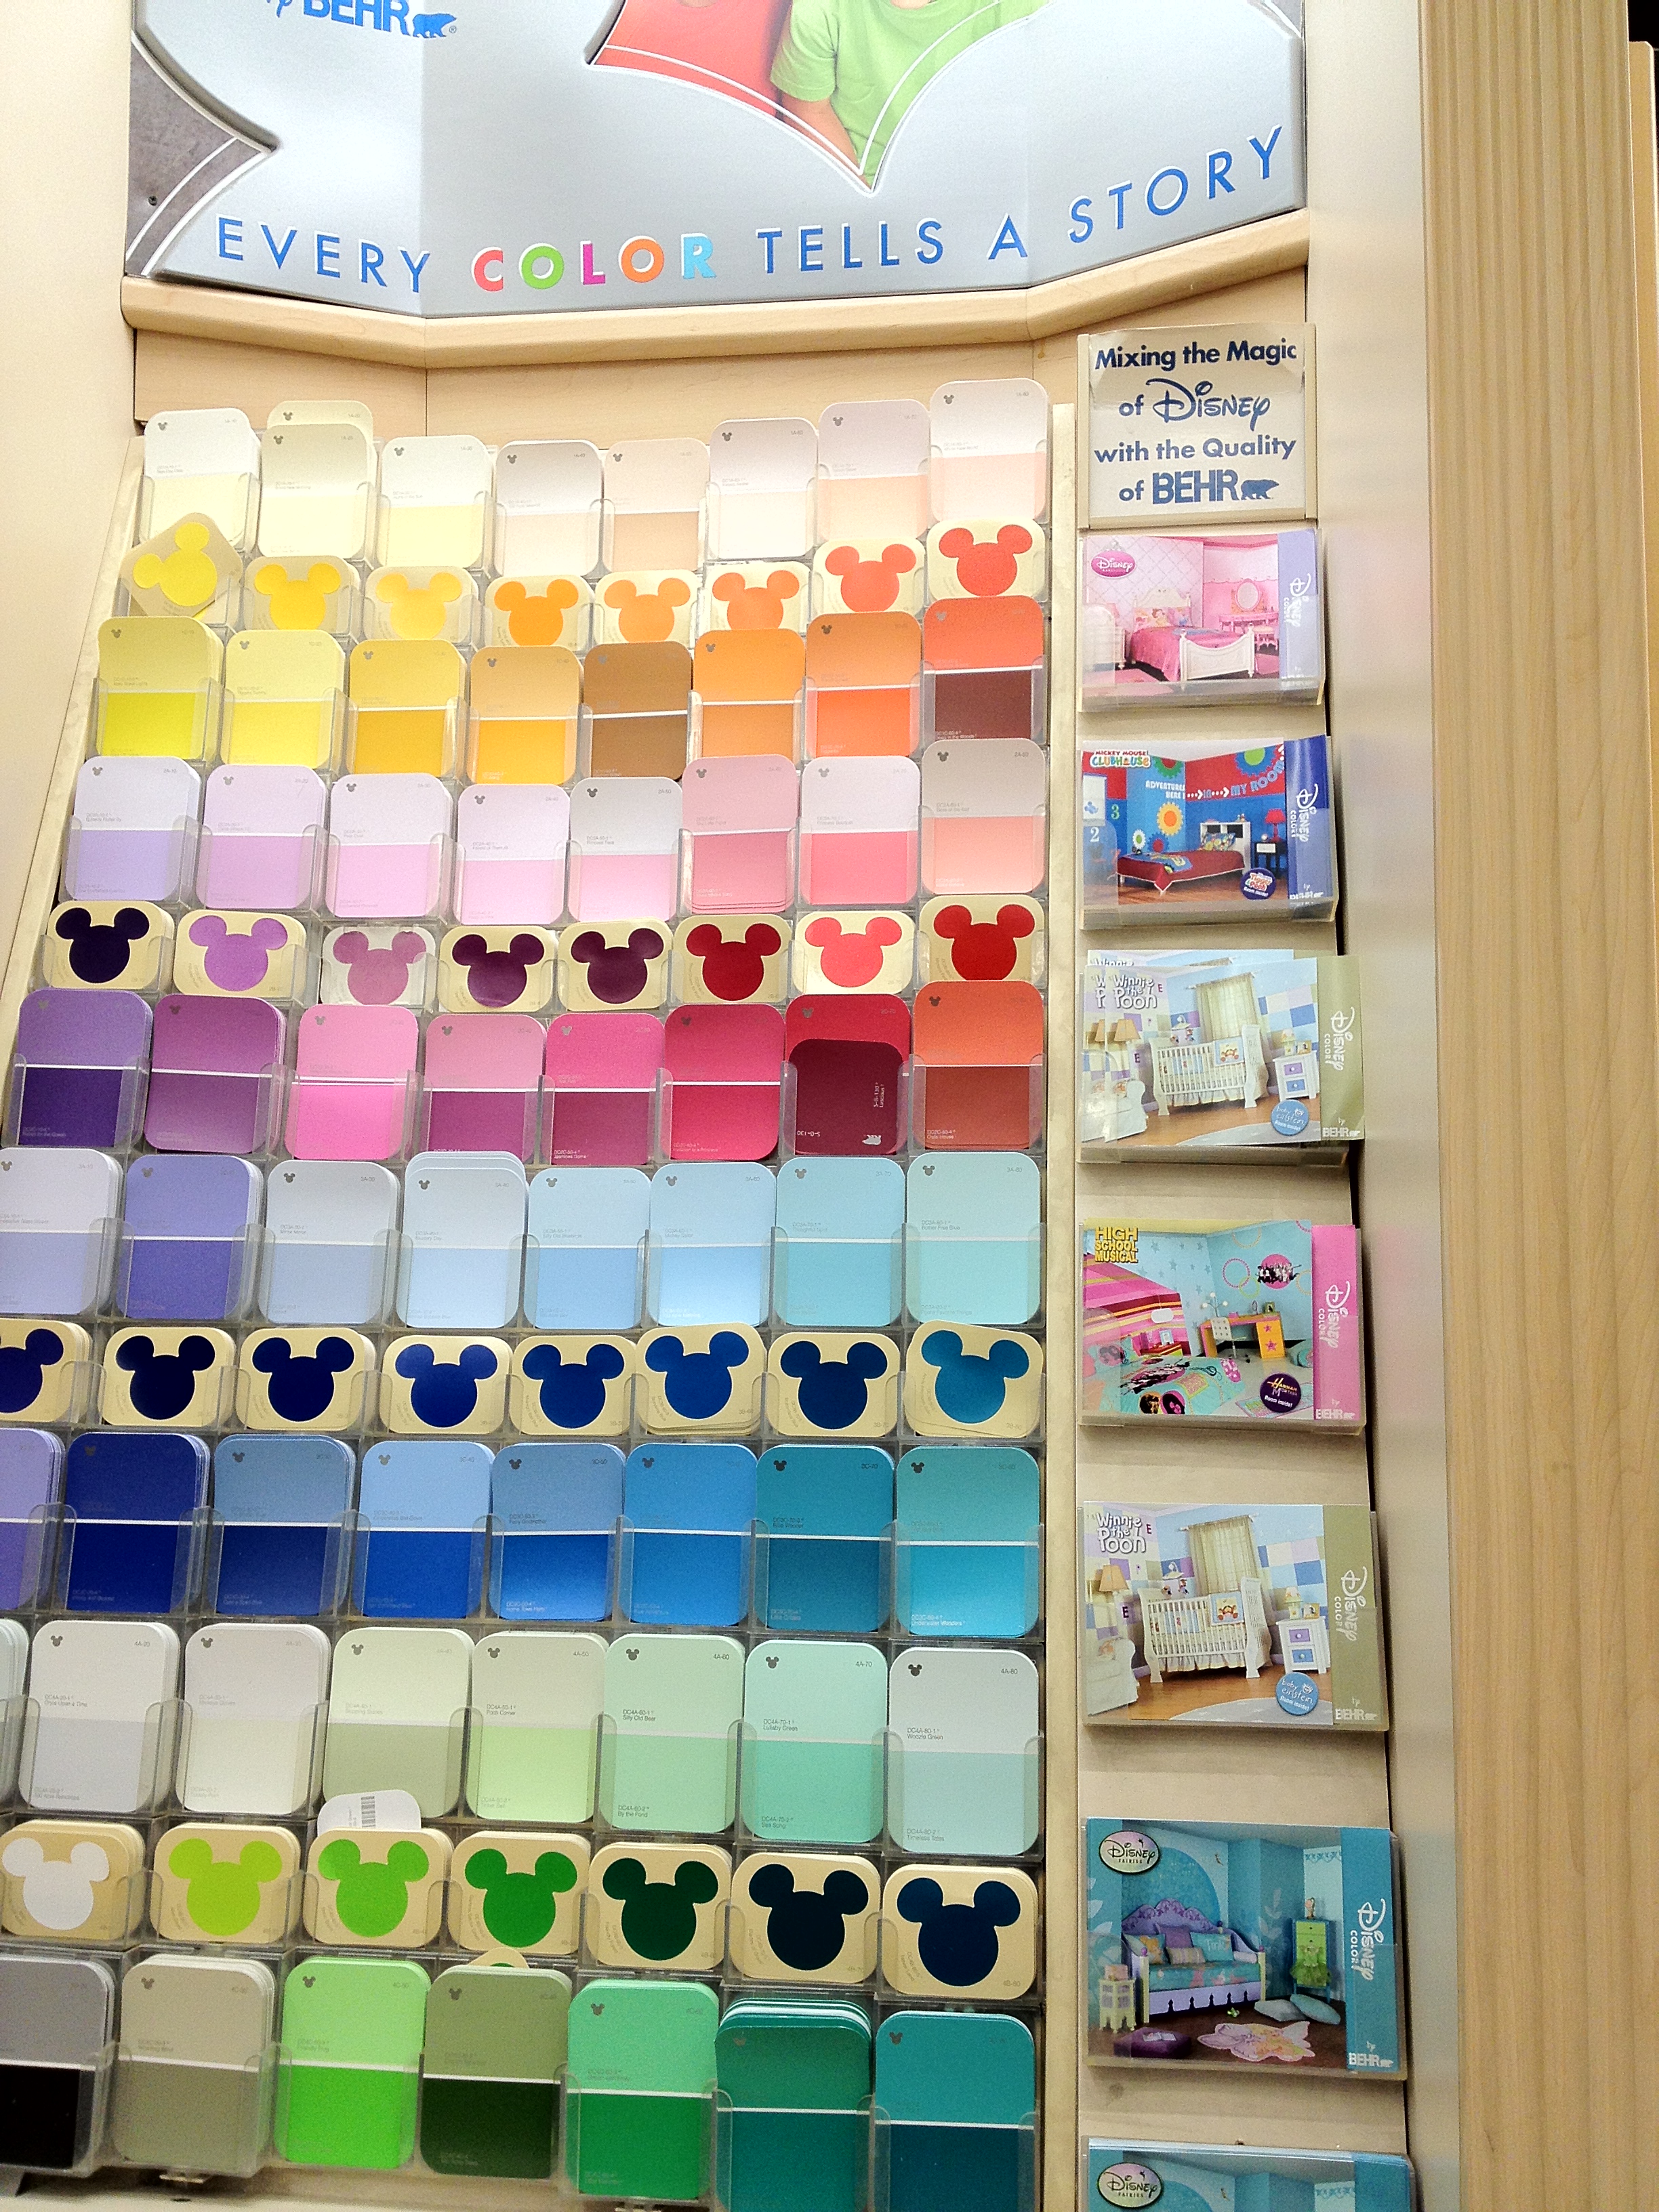 Disney Paint Swatches From Endearing Home Depot Paint Design ...